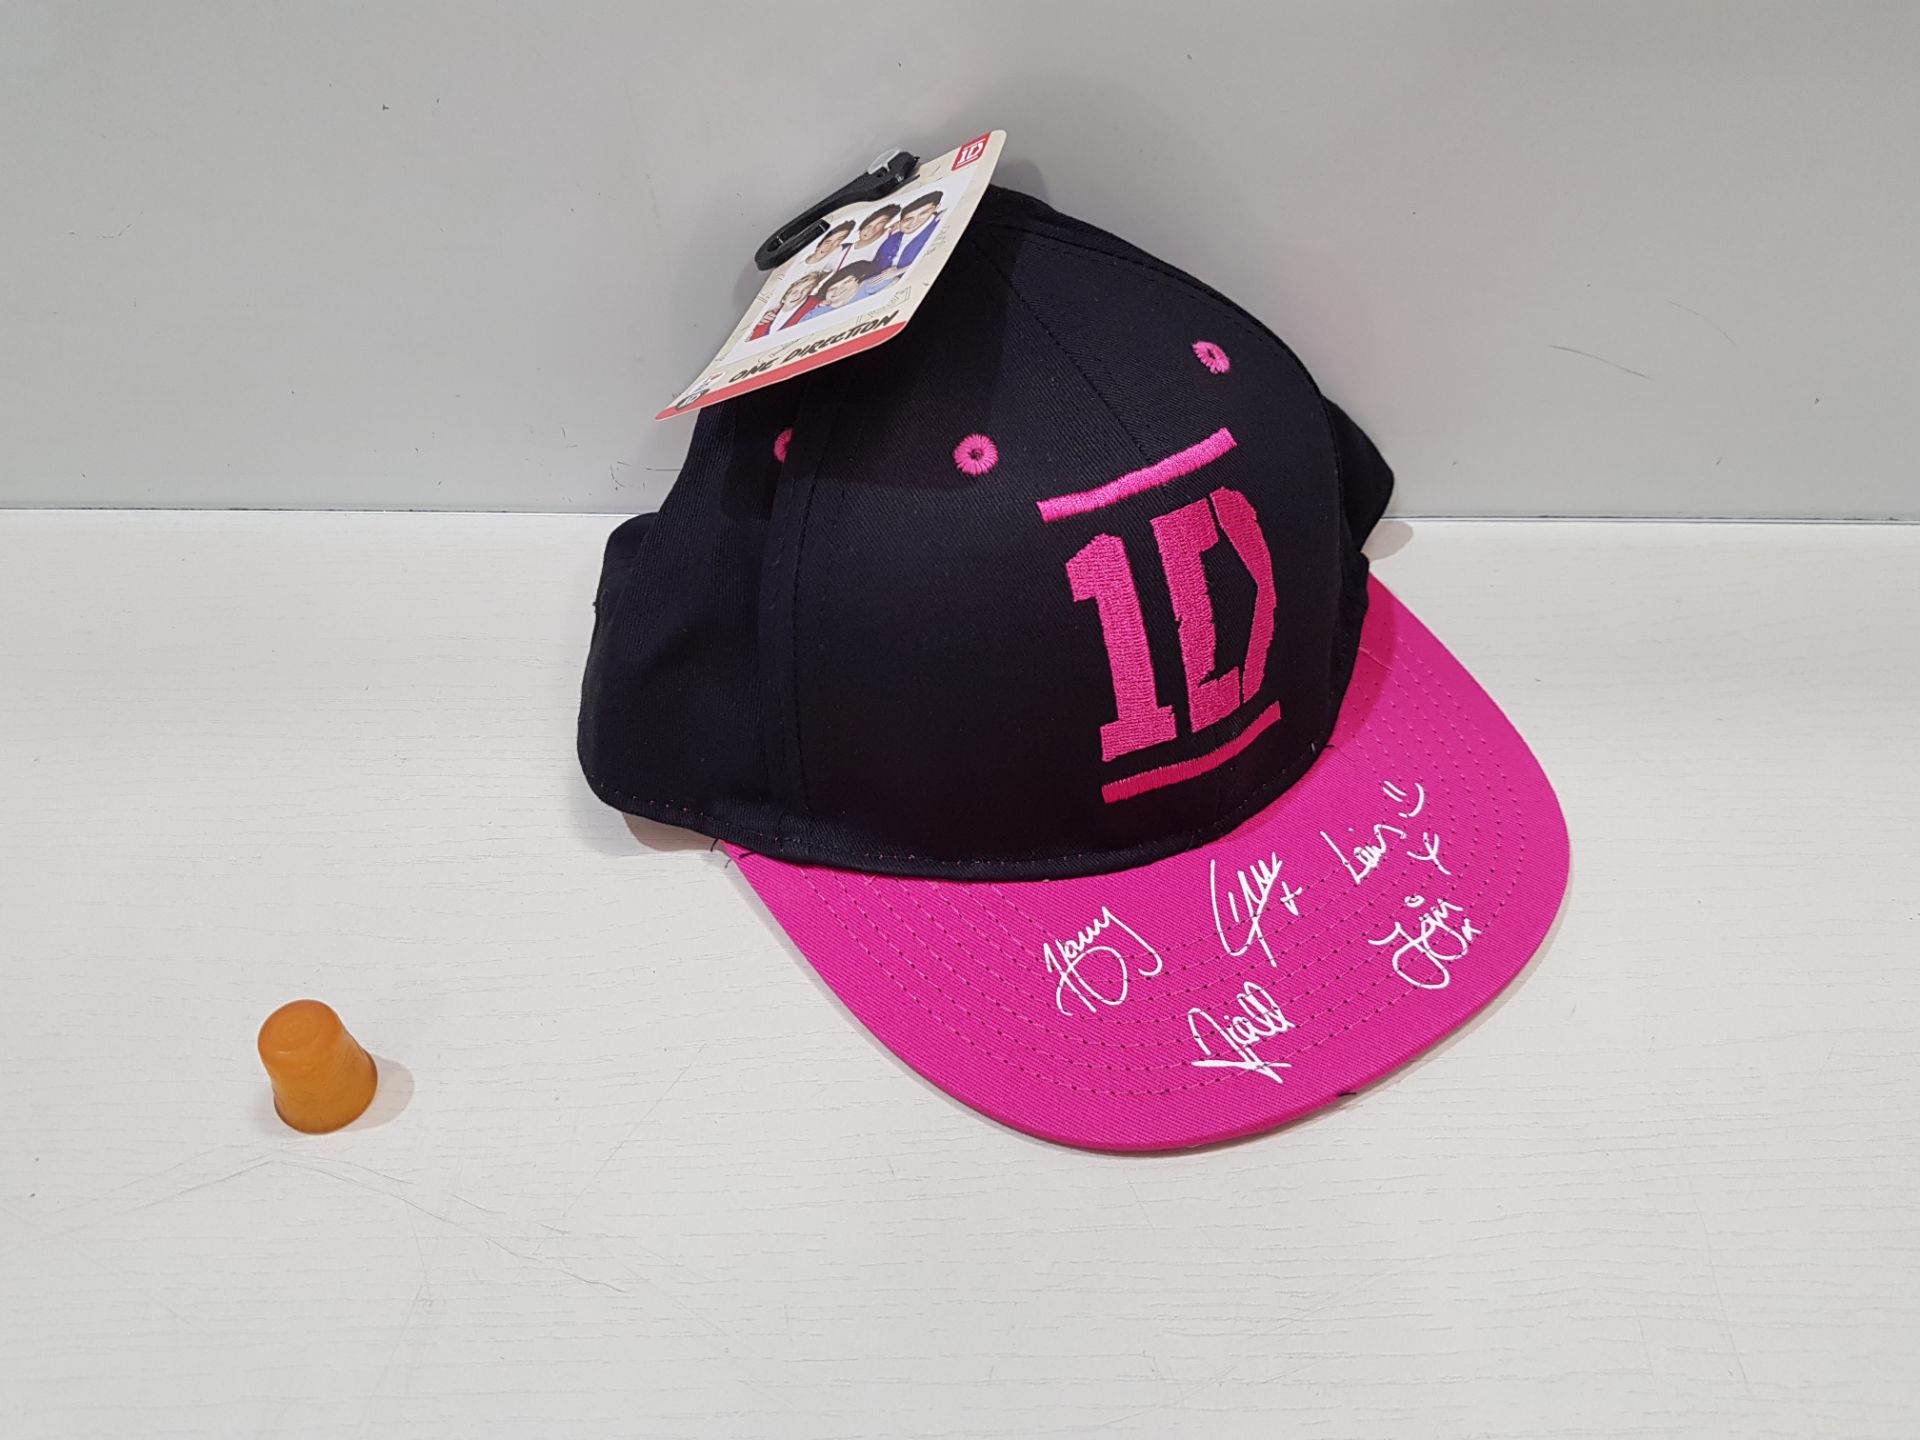 45 X BRAND NEW 1 DIRECTION SIGNED PRINT STYLE HATS IN BLACK AND PINK (ALL IN SIZE 7 TO 12 YEARS)